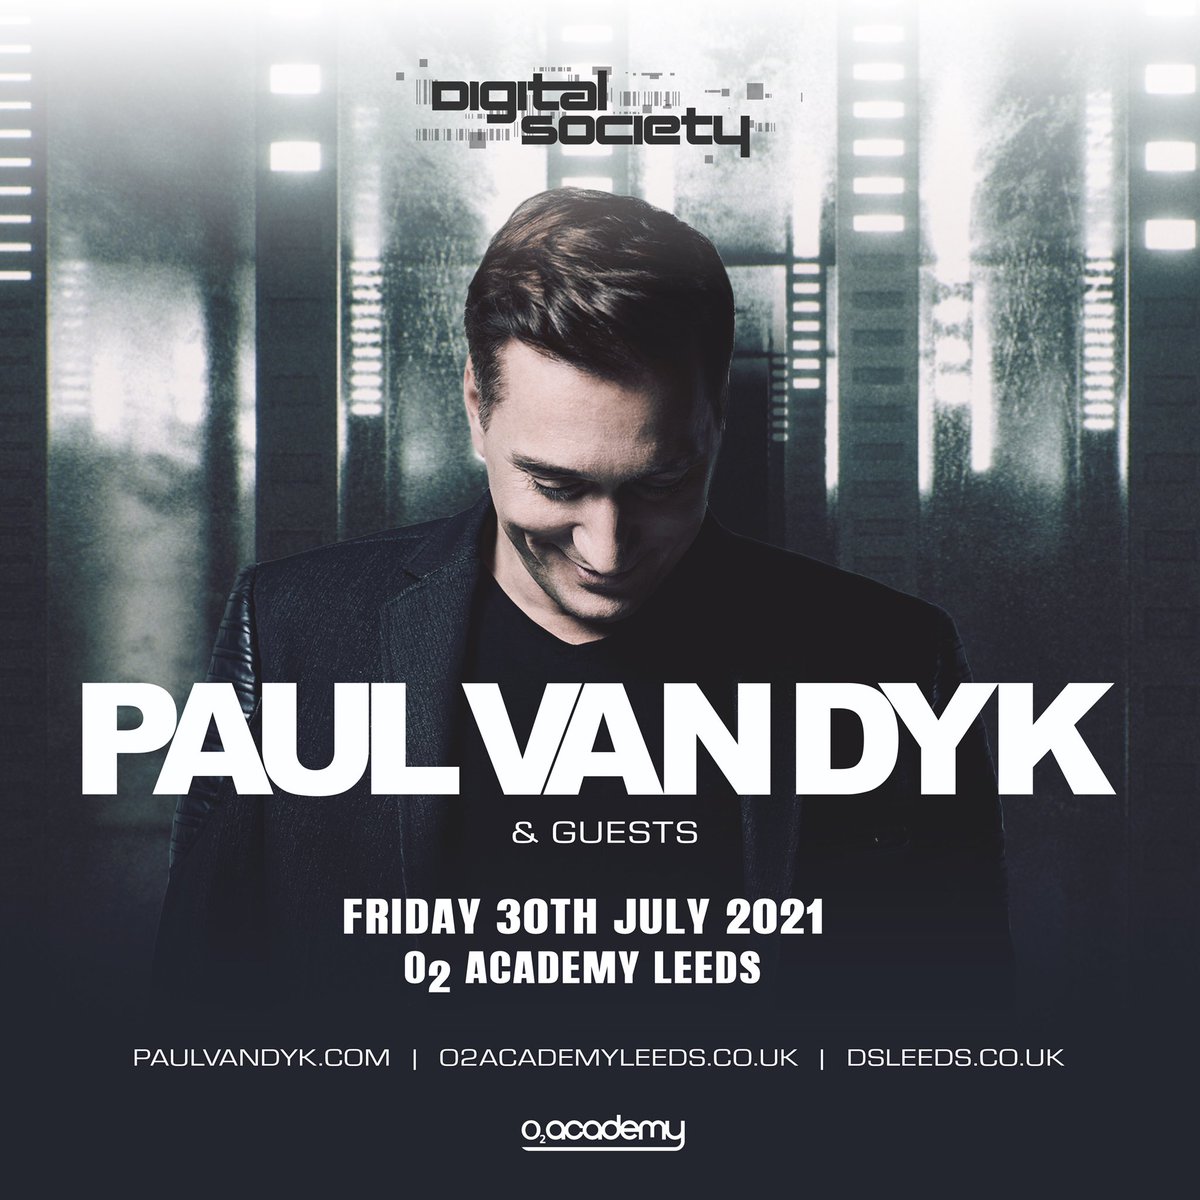 PVD returns this July 30th to the O2 Academy Leeds, with full DS production! @PAULVANDYK @O2AcademyLeeds dsleeds.co.uk Tickets on skiddle now 🔥